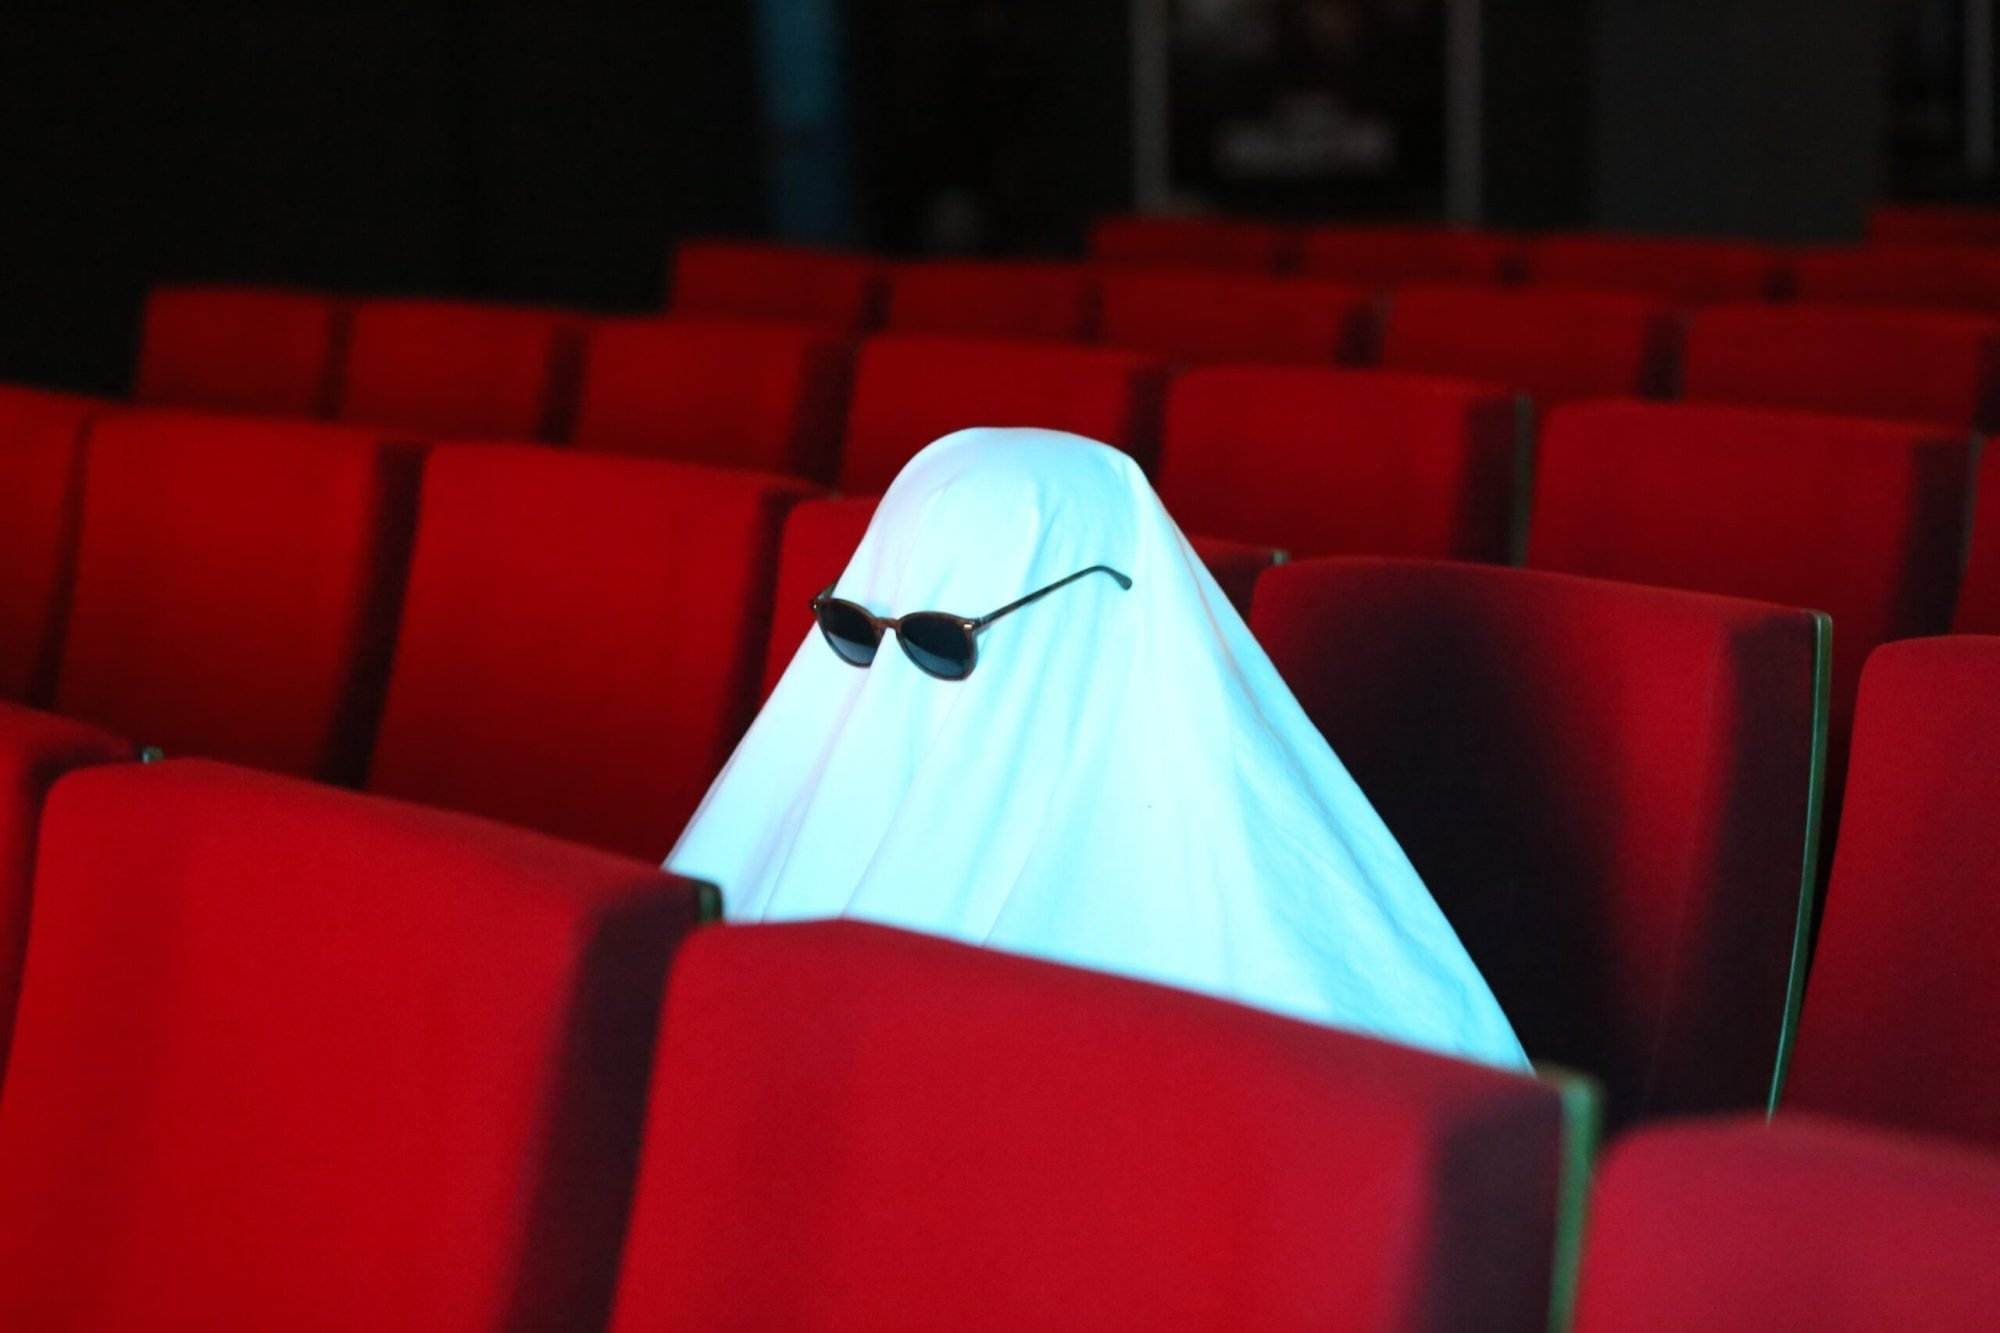 A ghost with goggles on sitting on the middle row of red seats.